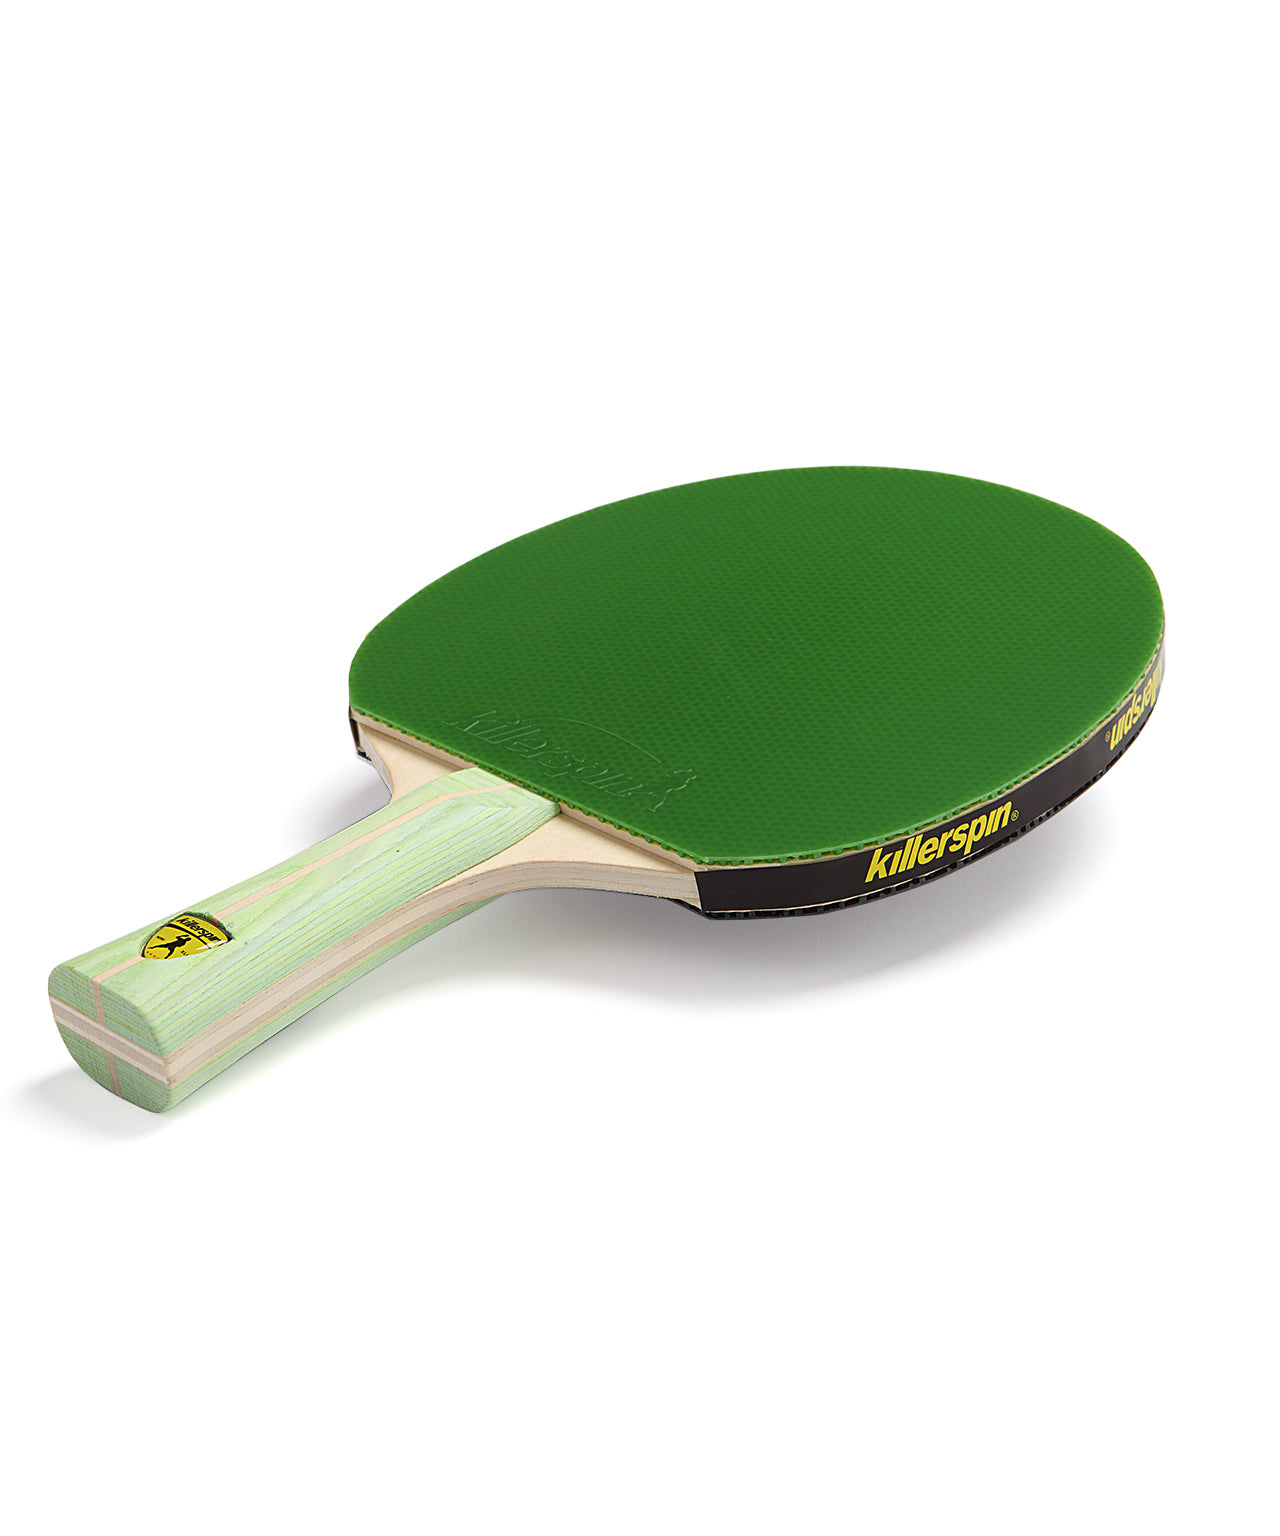 Killerspin Ping Pong Paddle Jet200 Lime - Green Rubber